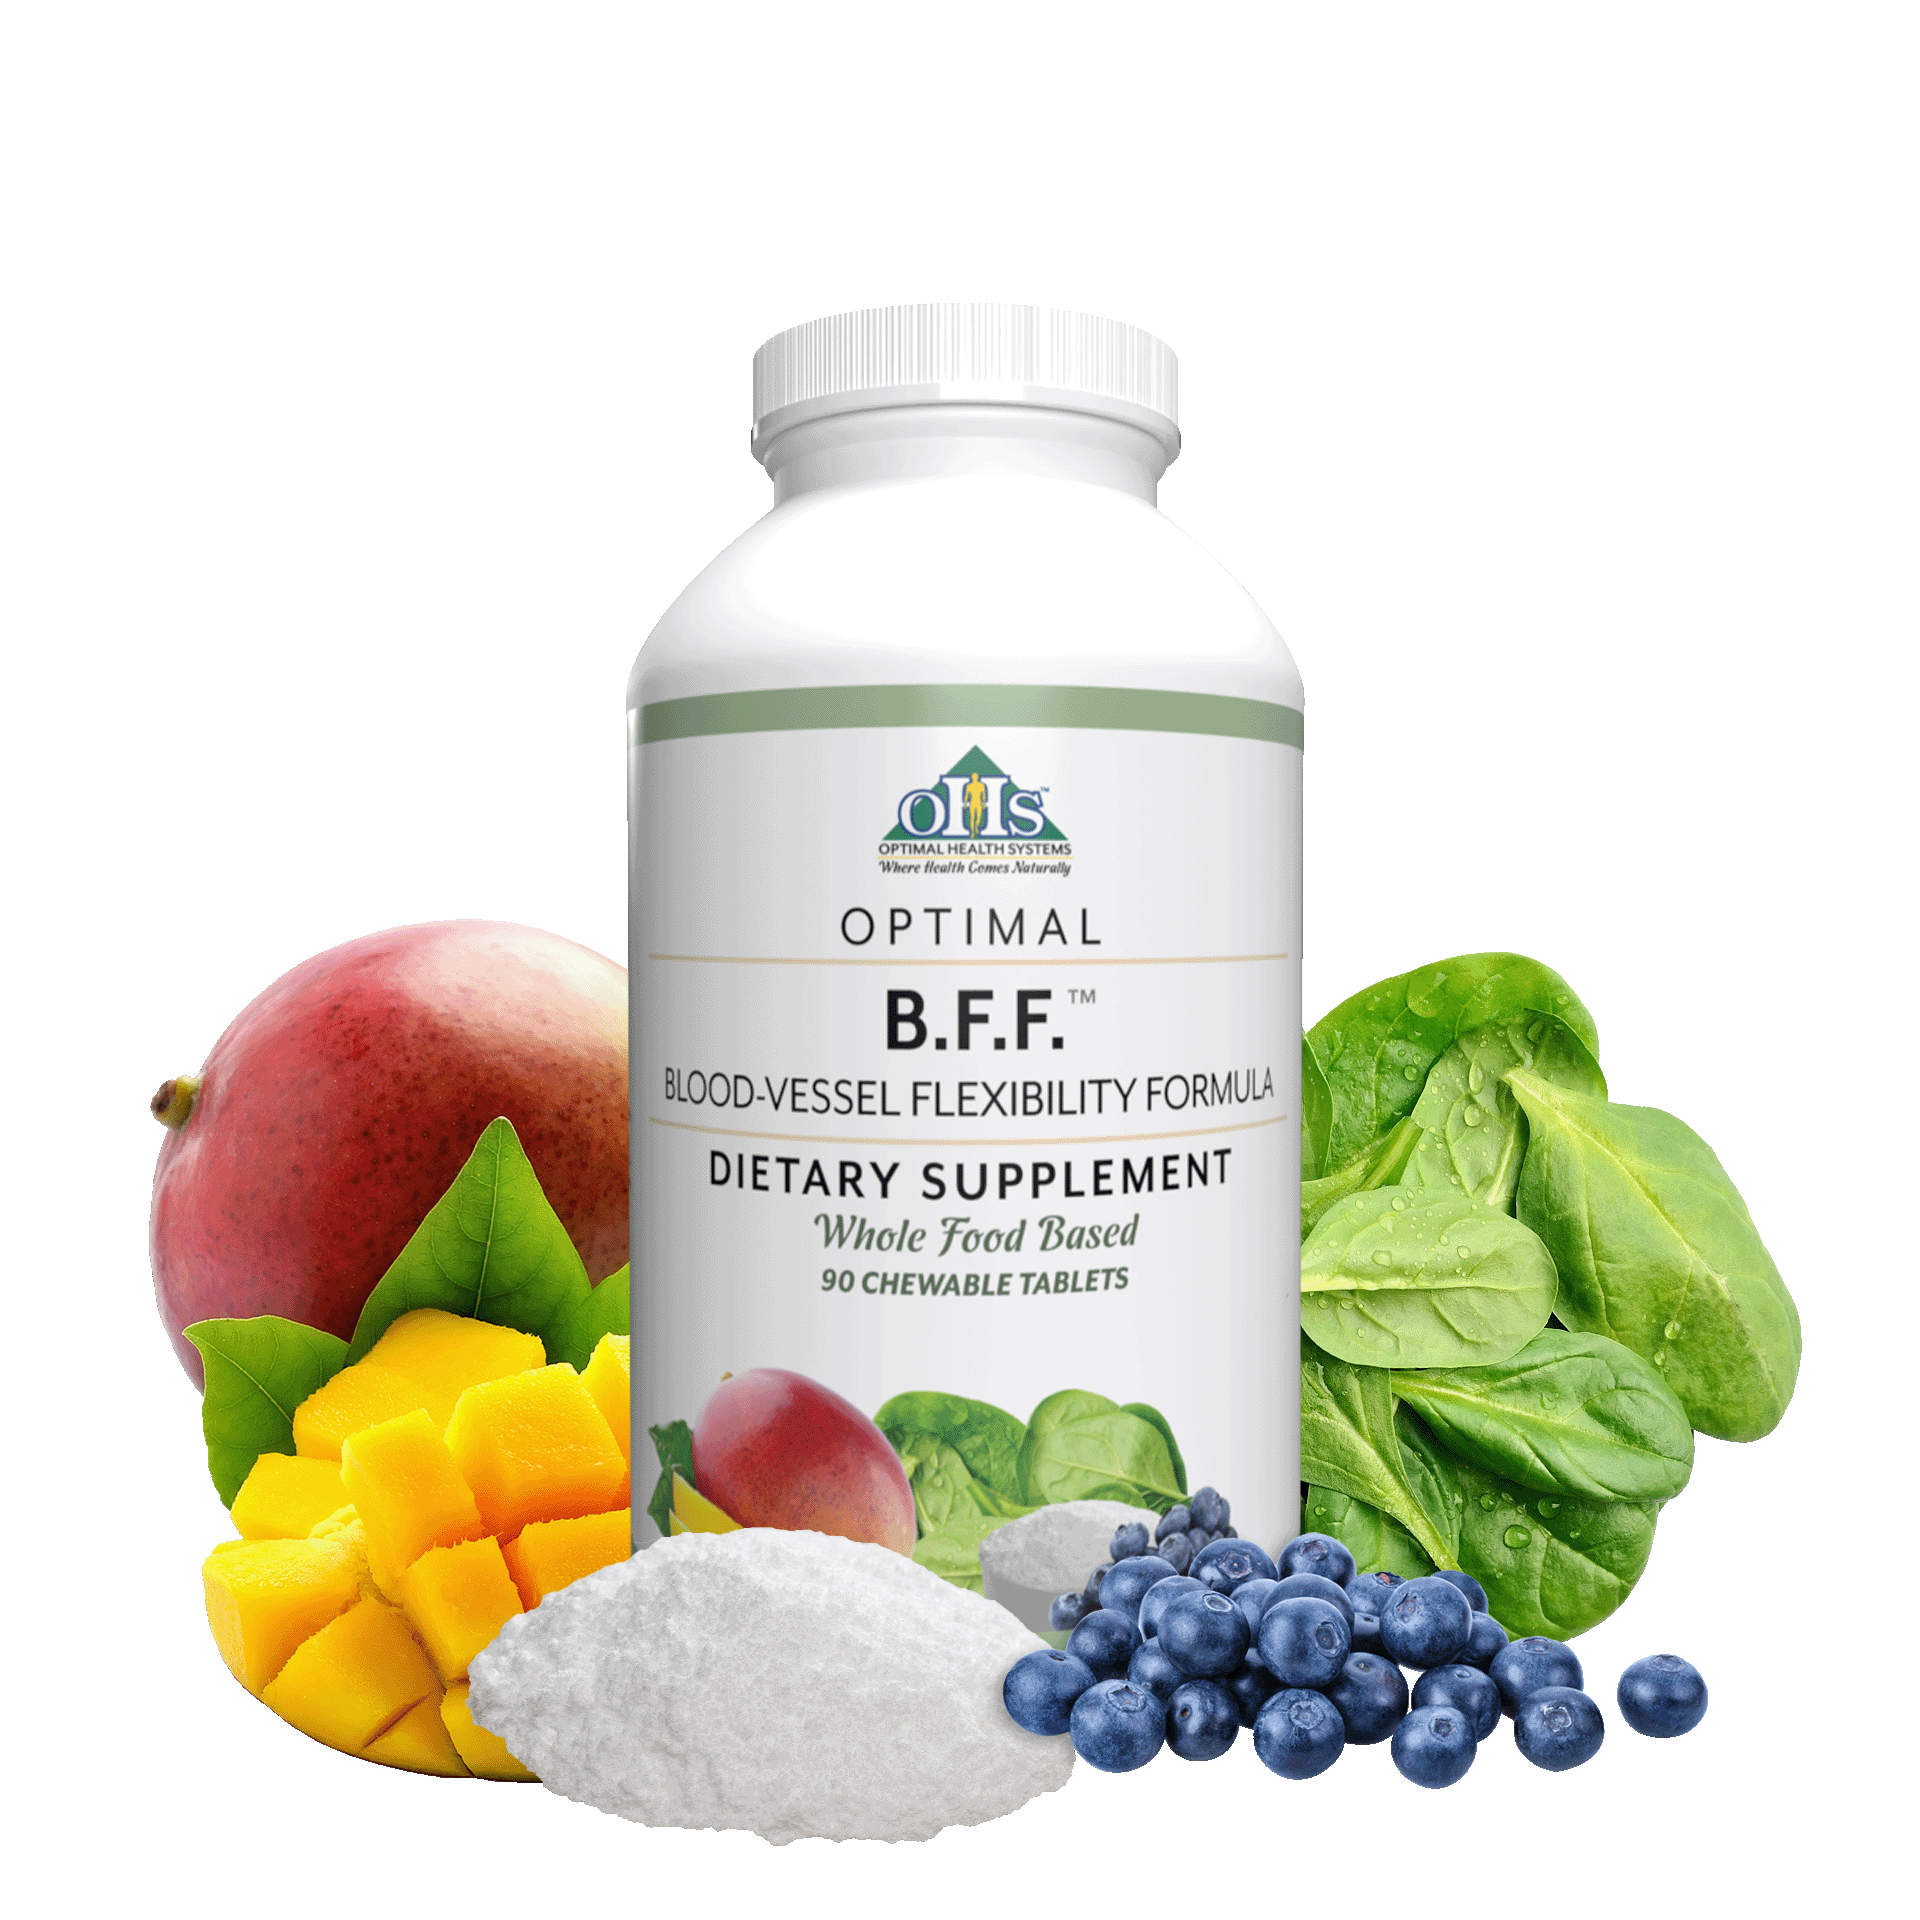 Image of a bottle of Optimal B.F.F. with mango, spinach, blueberries, and creatine nitrate powder.